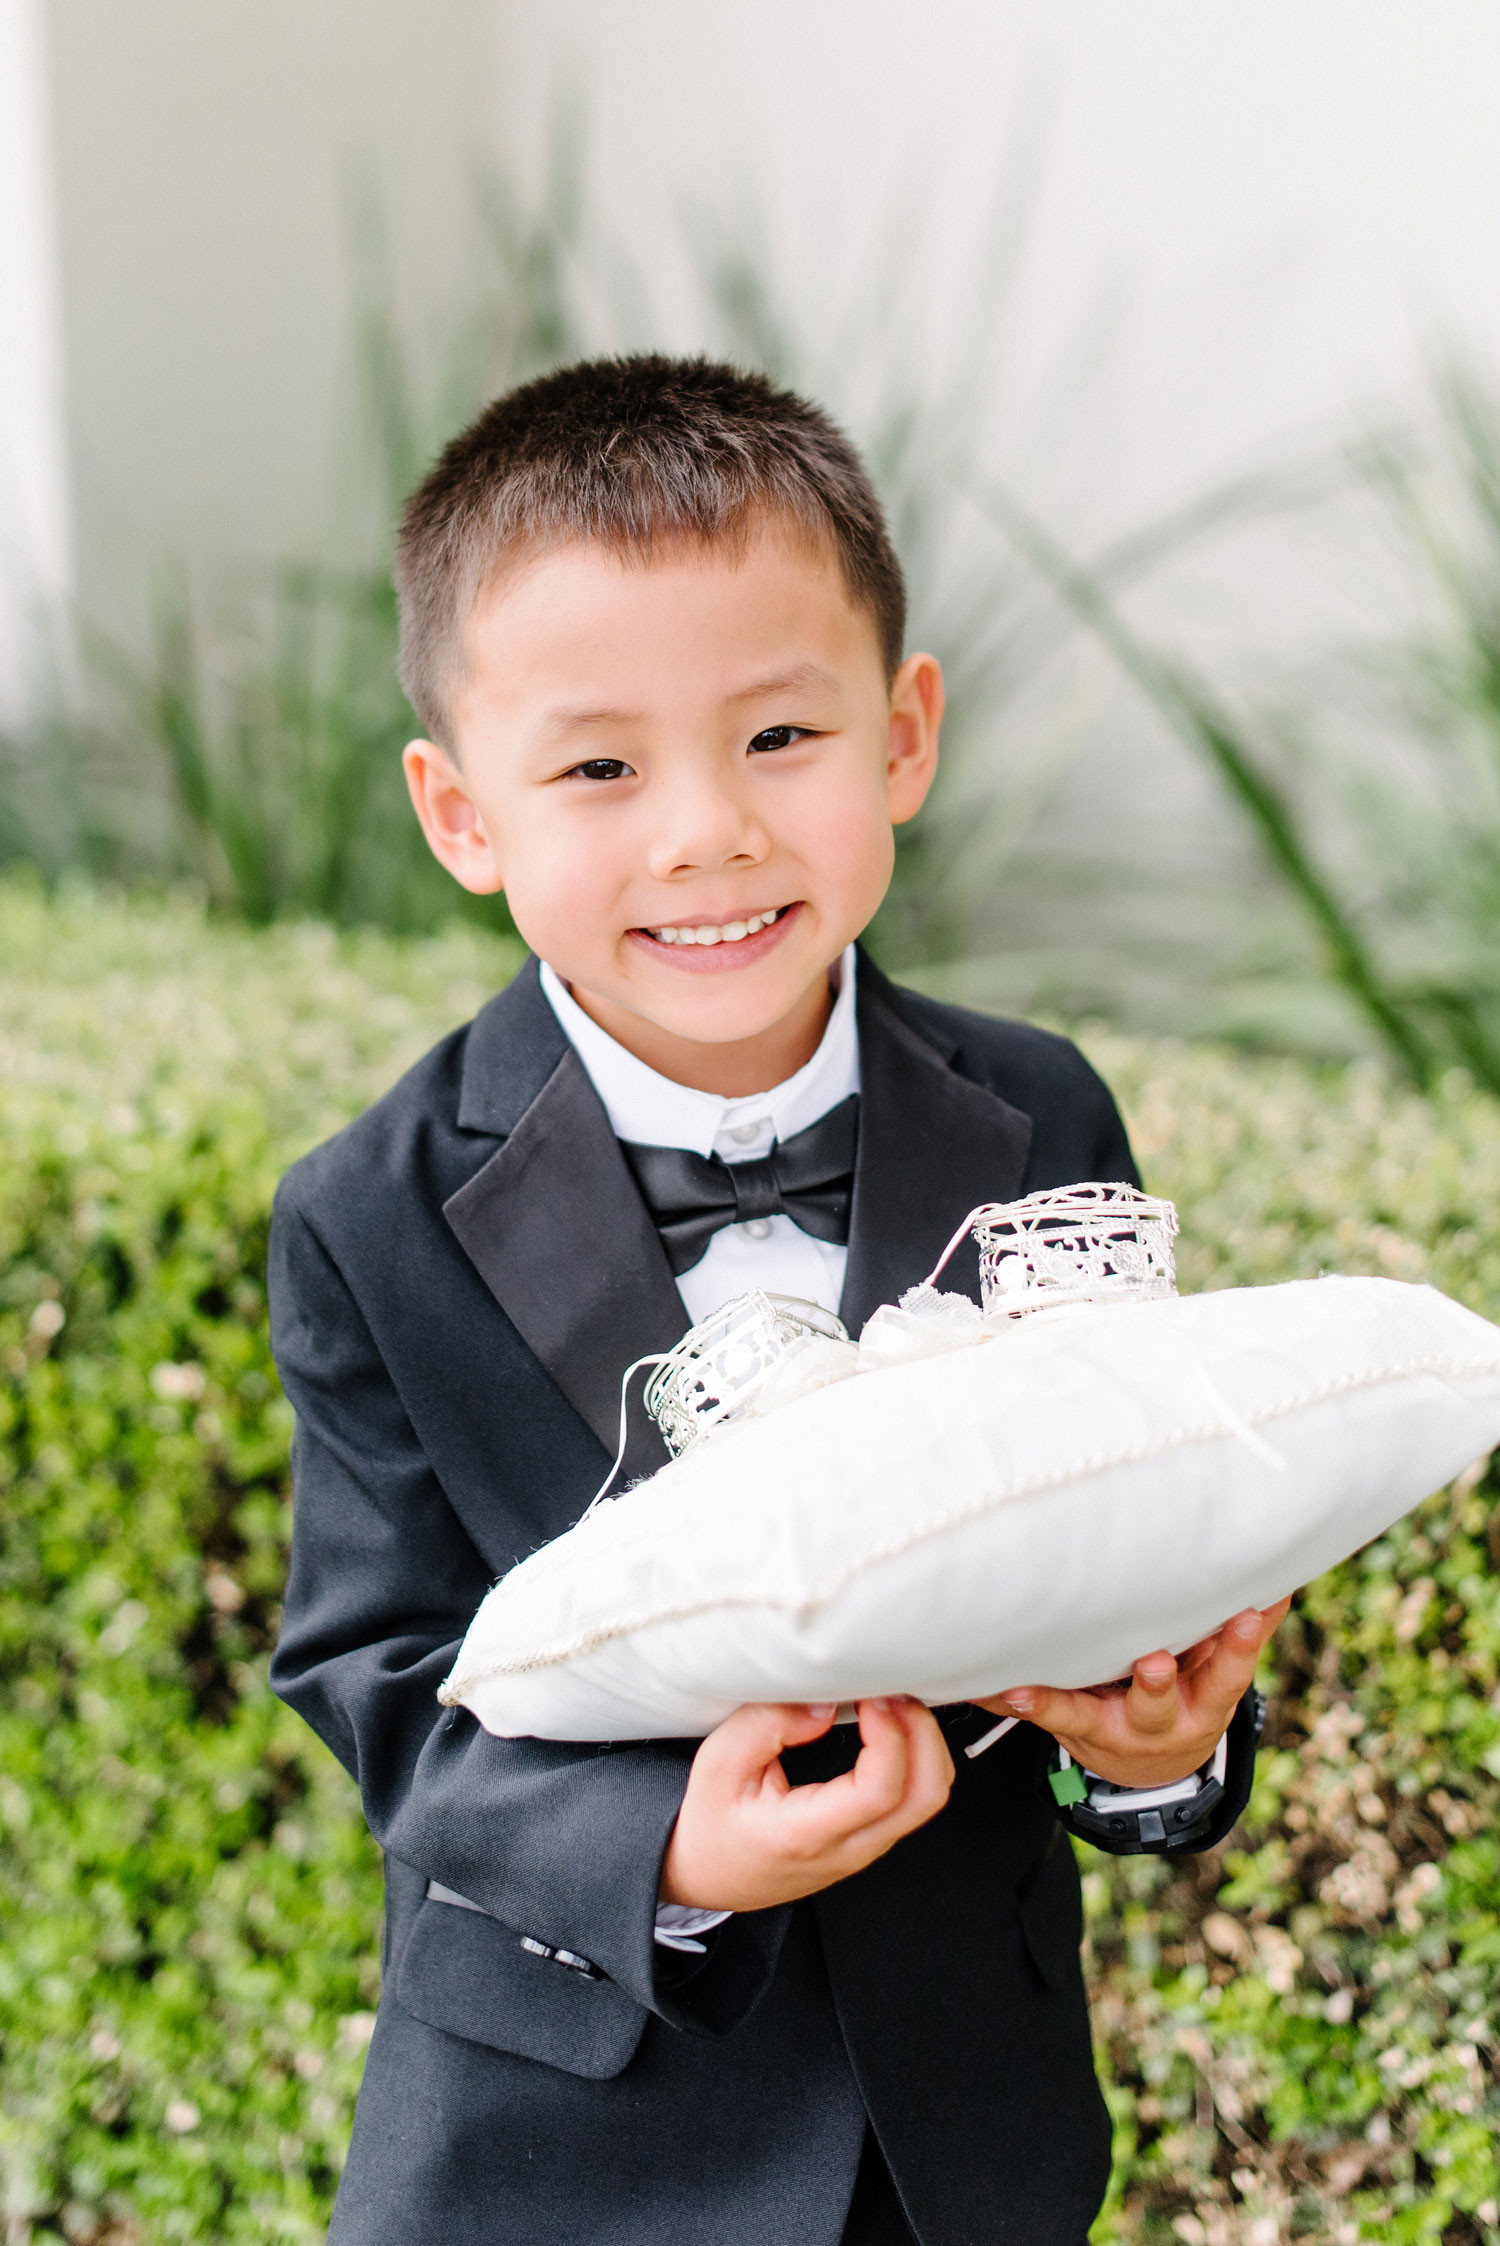 Wedding Ring Bearer
 24 of the Cutest Flower Girls & Ring Bearers at Real